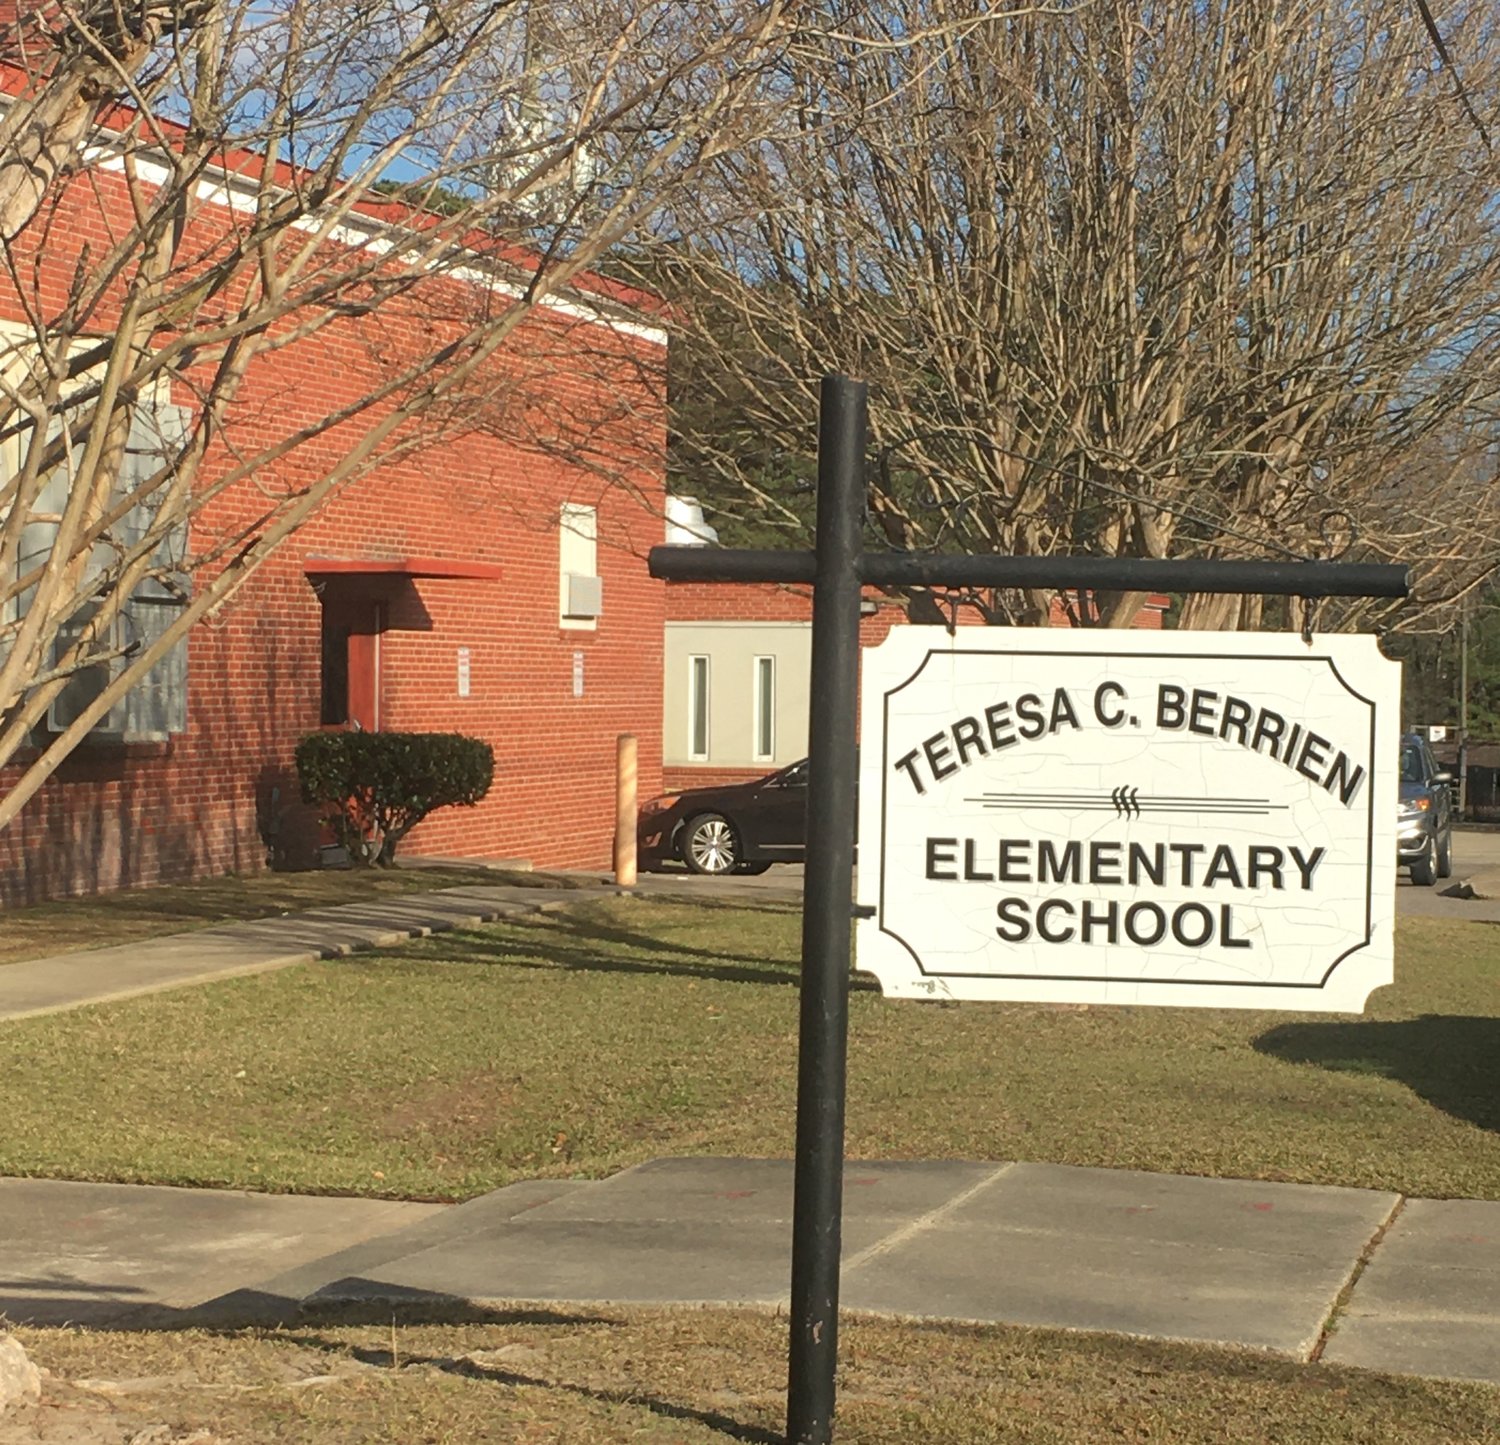 The Cumberland County school board has scheduled three public forums this week as it considers closing T.C. Berrien Elementary School.